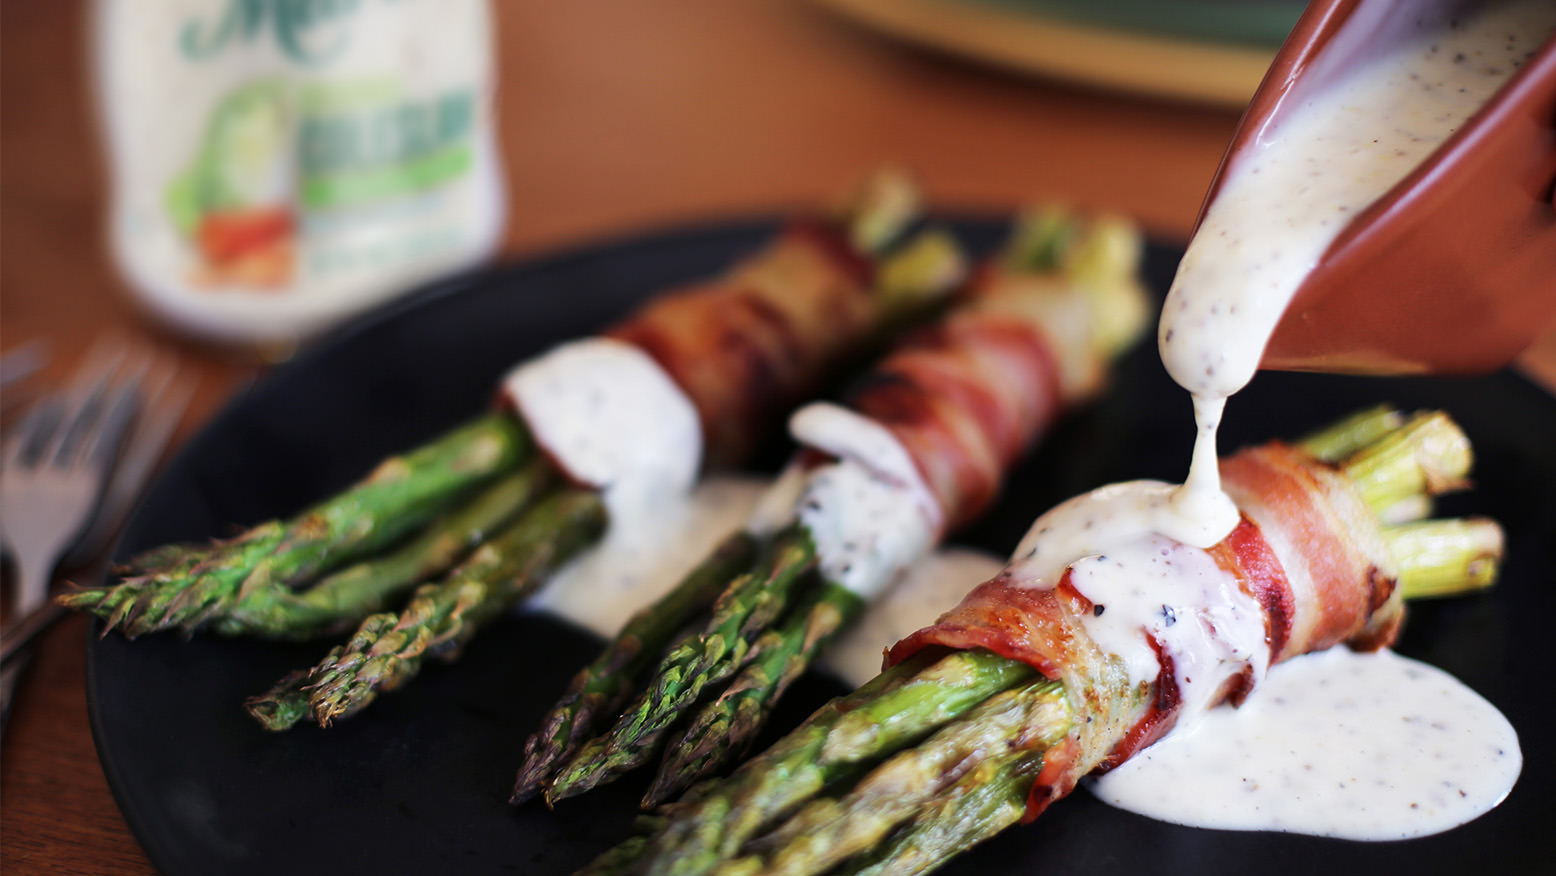 Asparagus with Bacon and Lemon Pepper Drizzle is made with Marie’s Original Coleslaw Dressing.